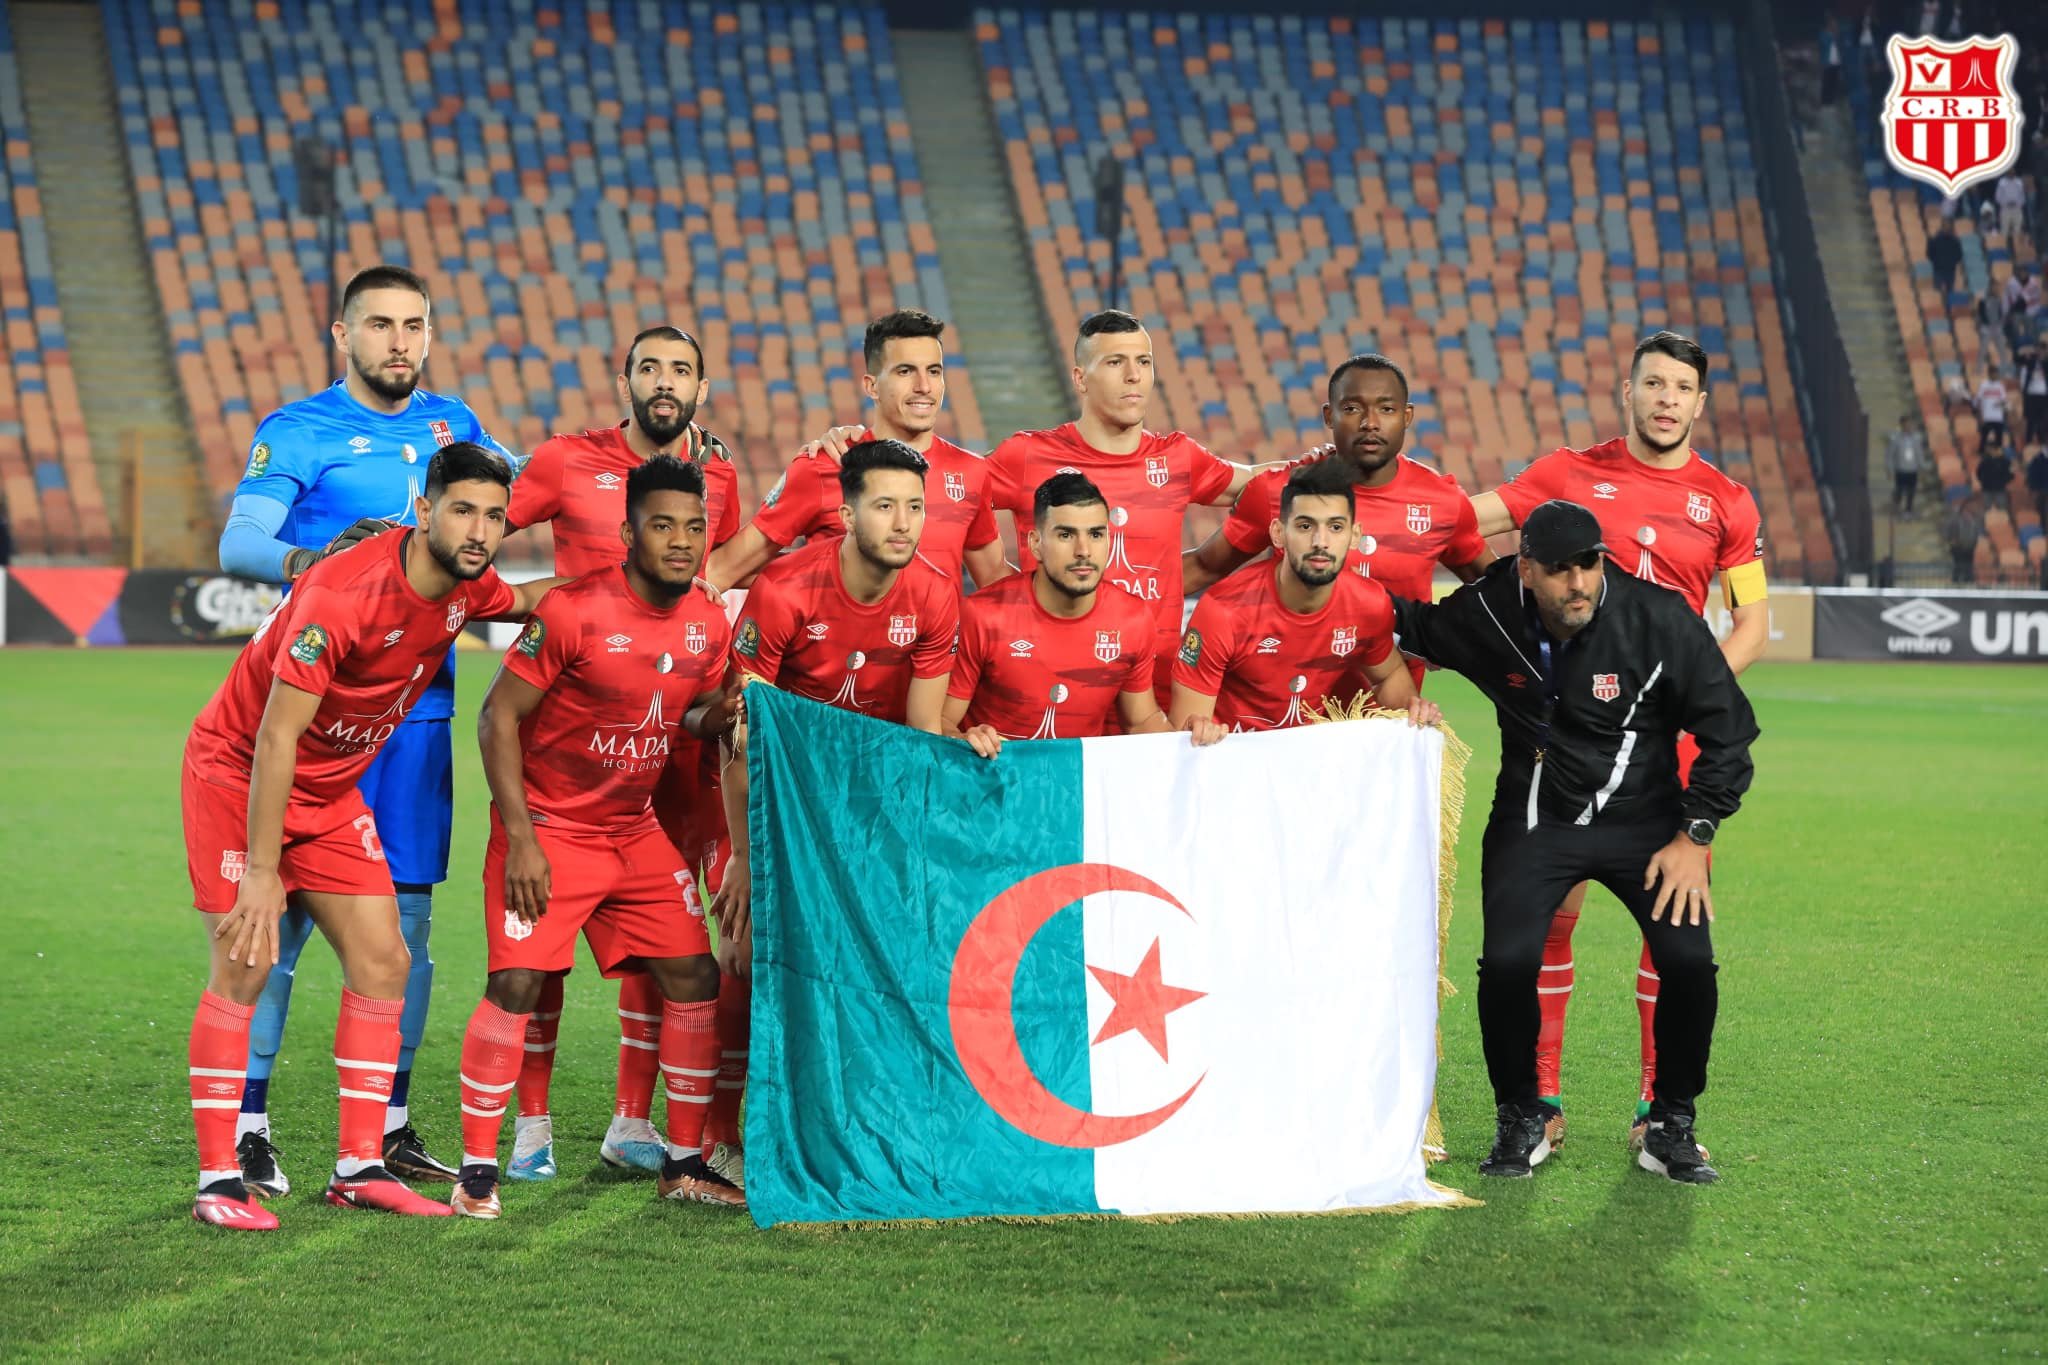 Two Algerian clubs in CAF's African Top 10 Ranking